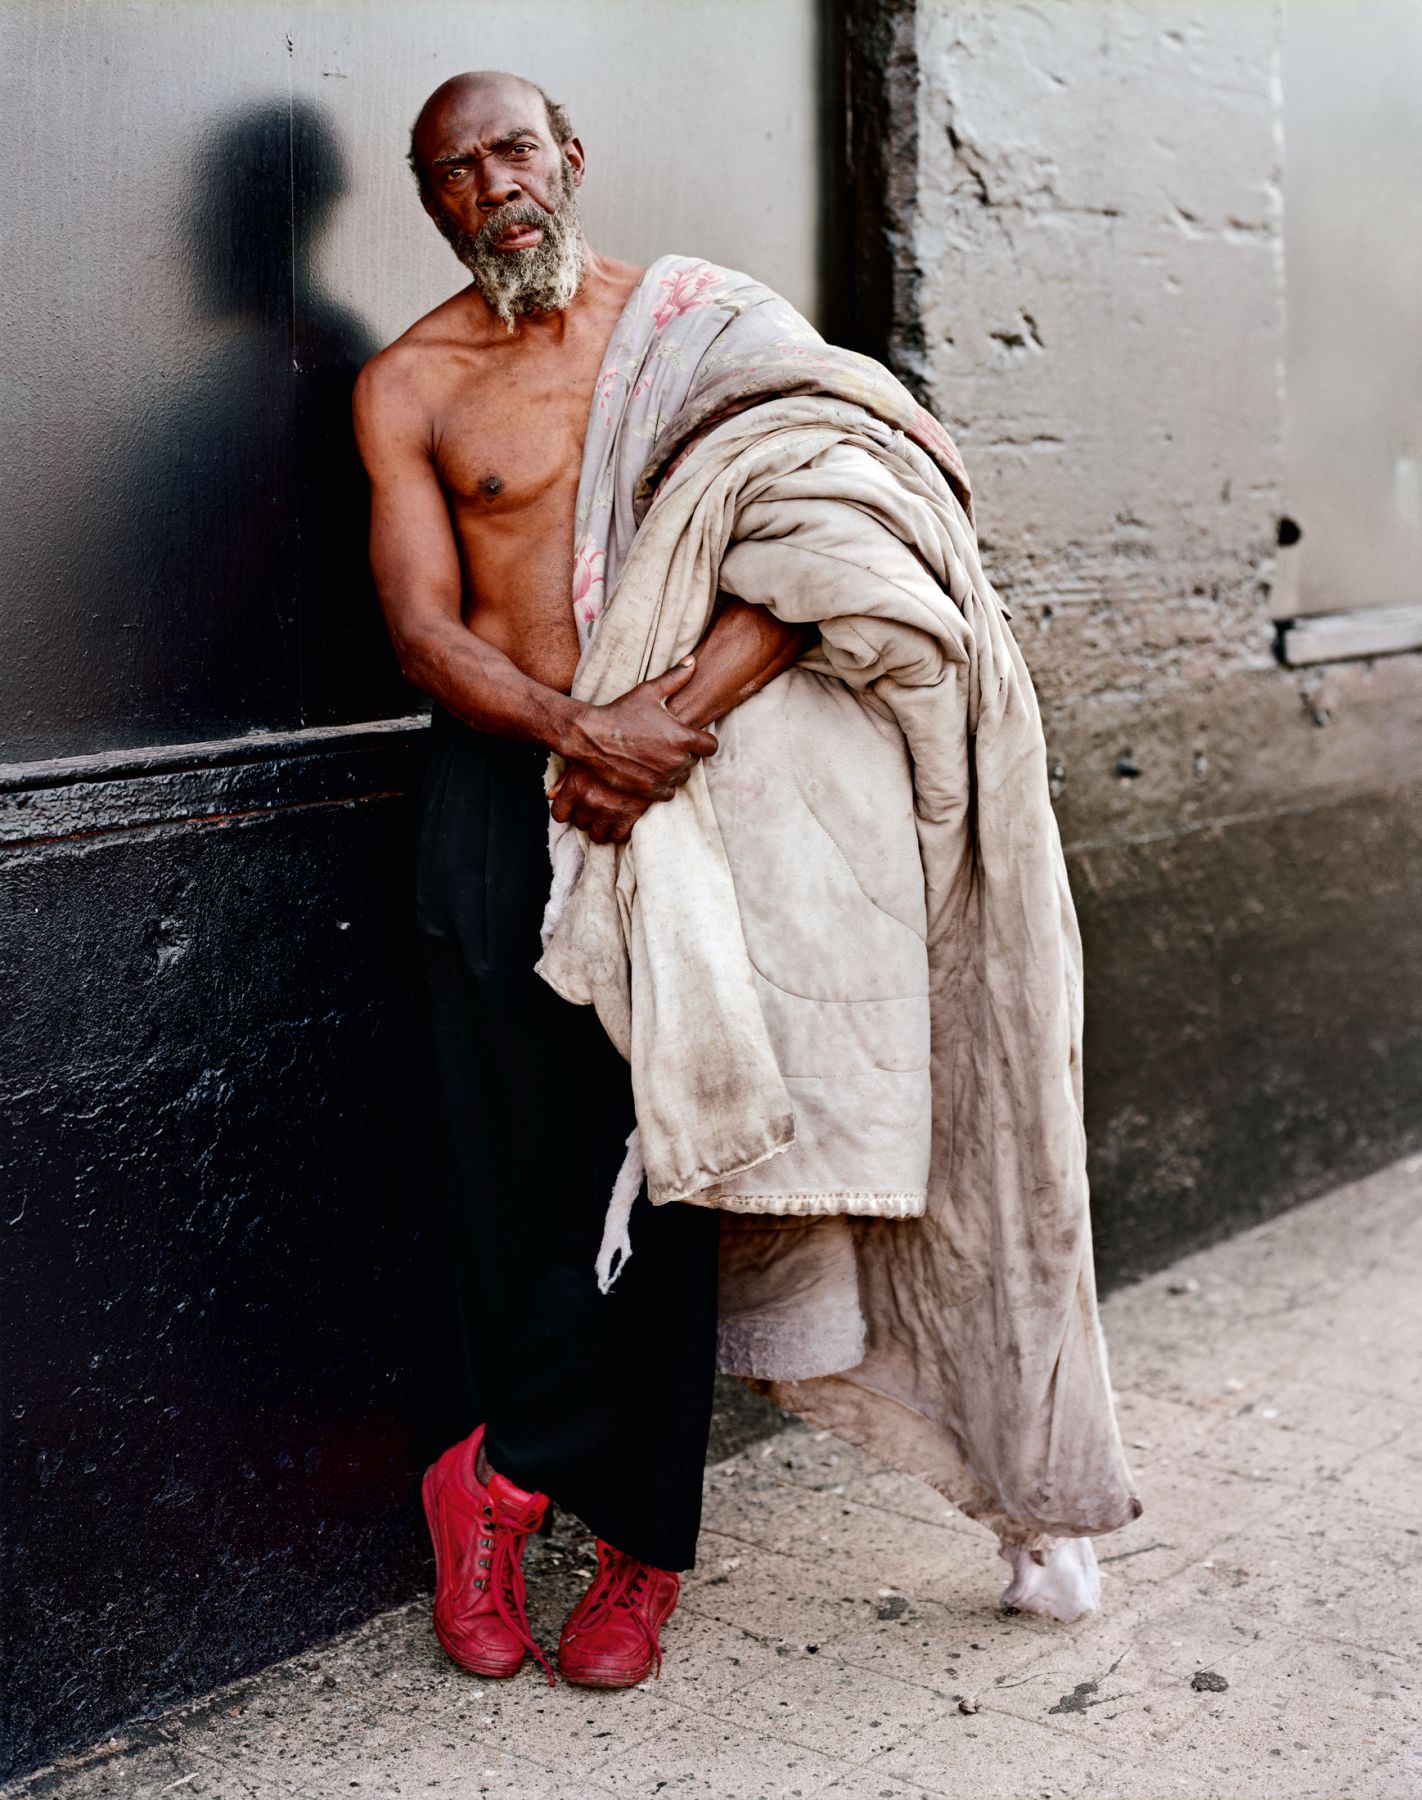 A Homeless Man With His Bedding, New York, New York, July 1993